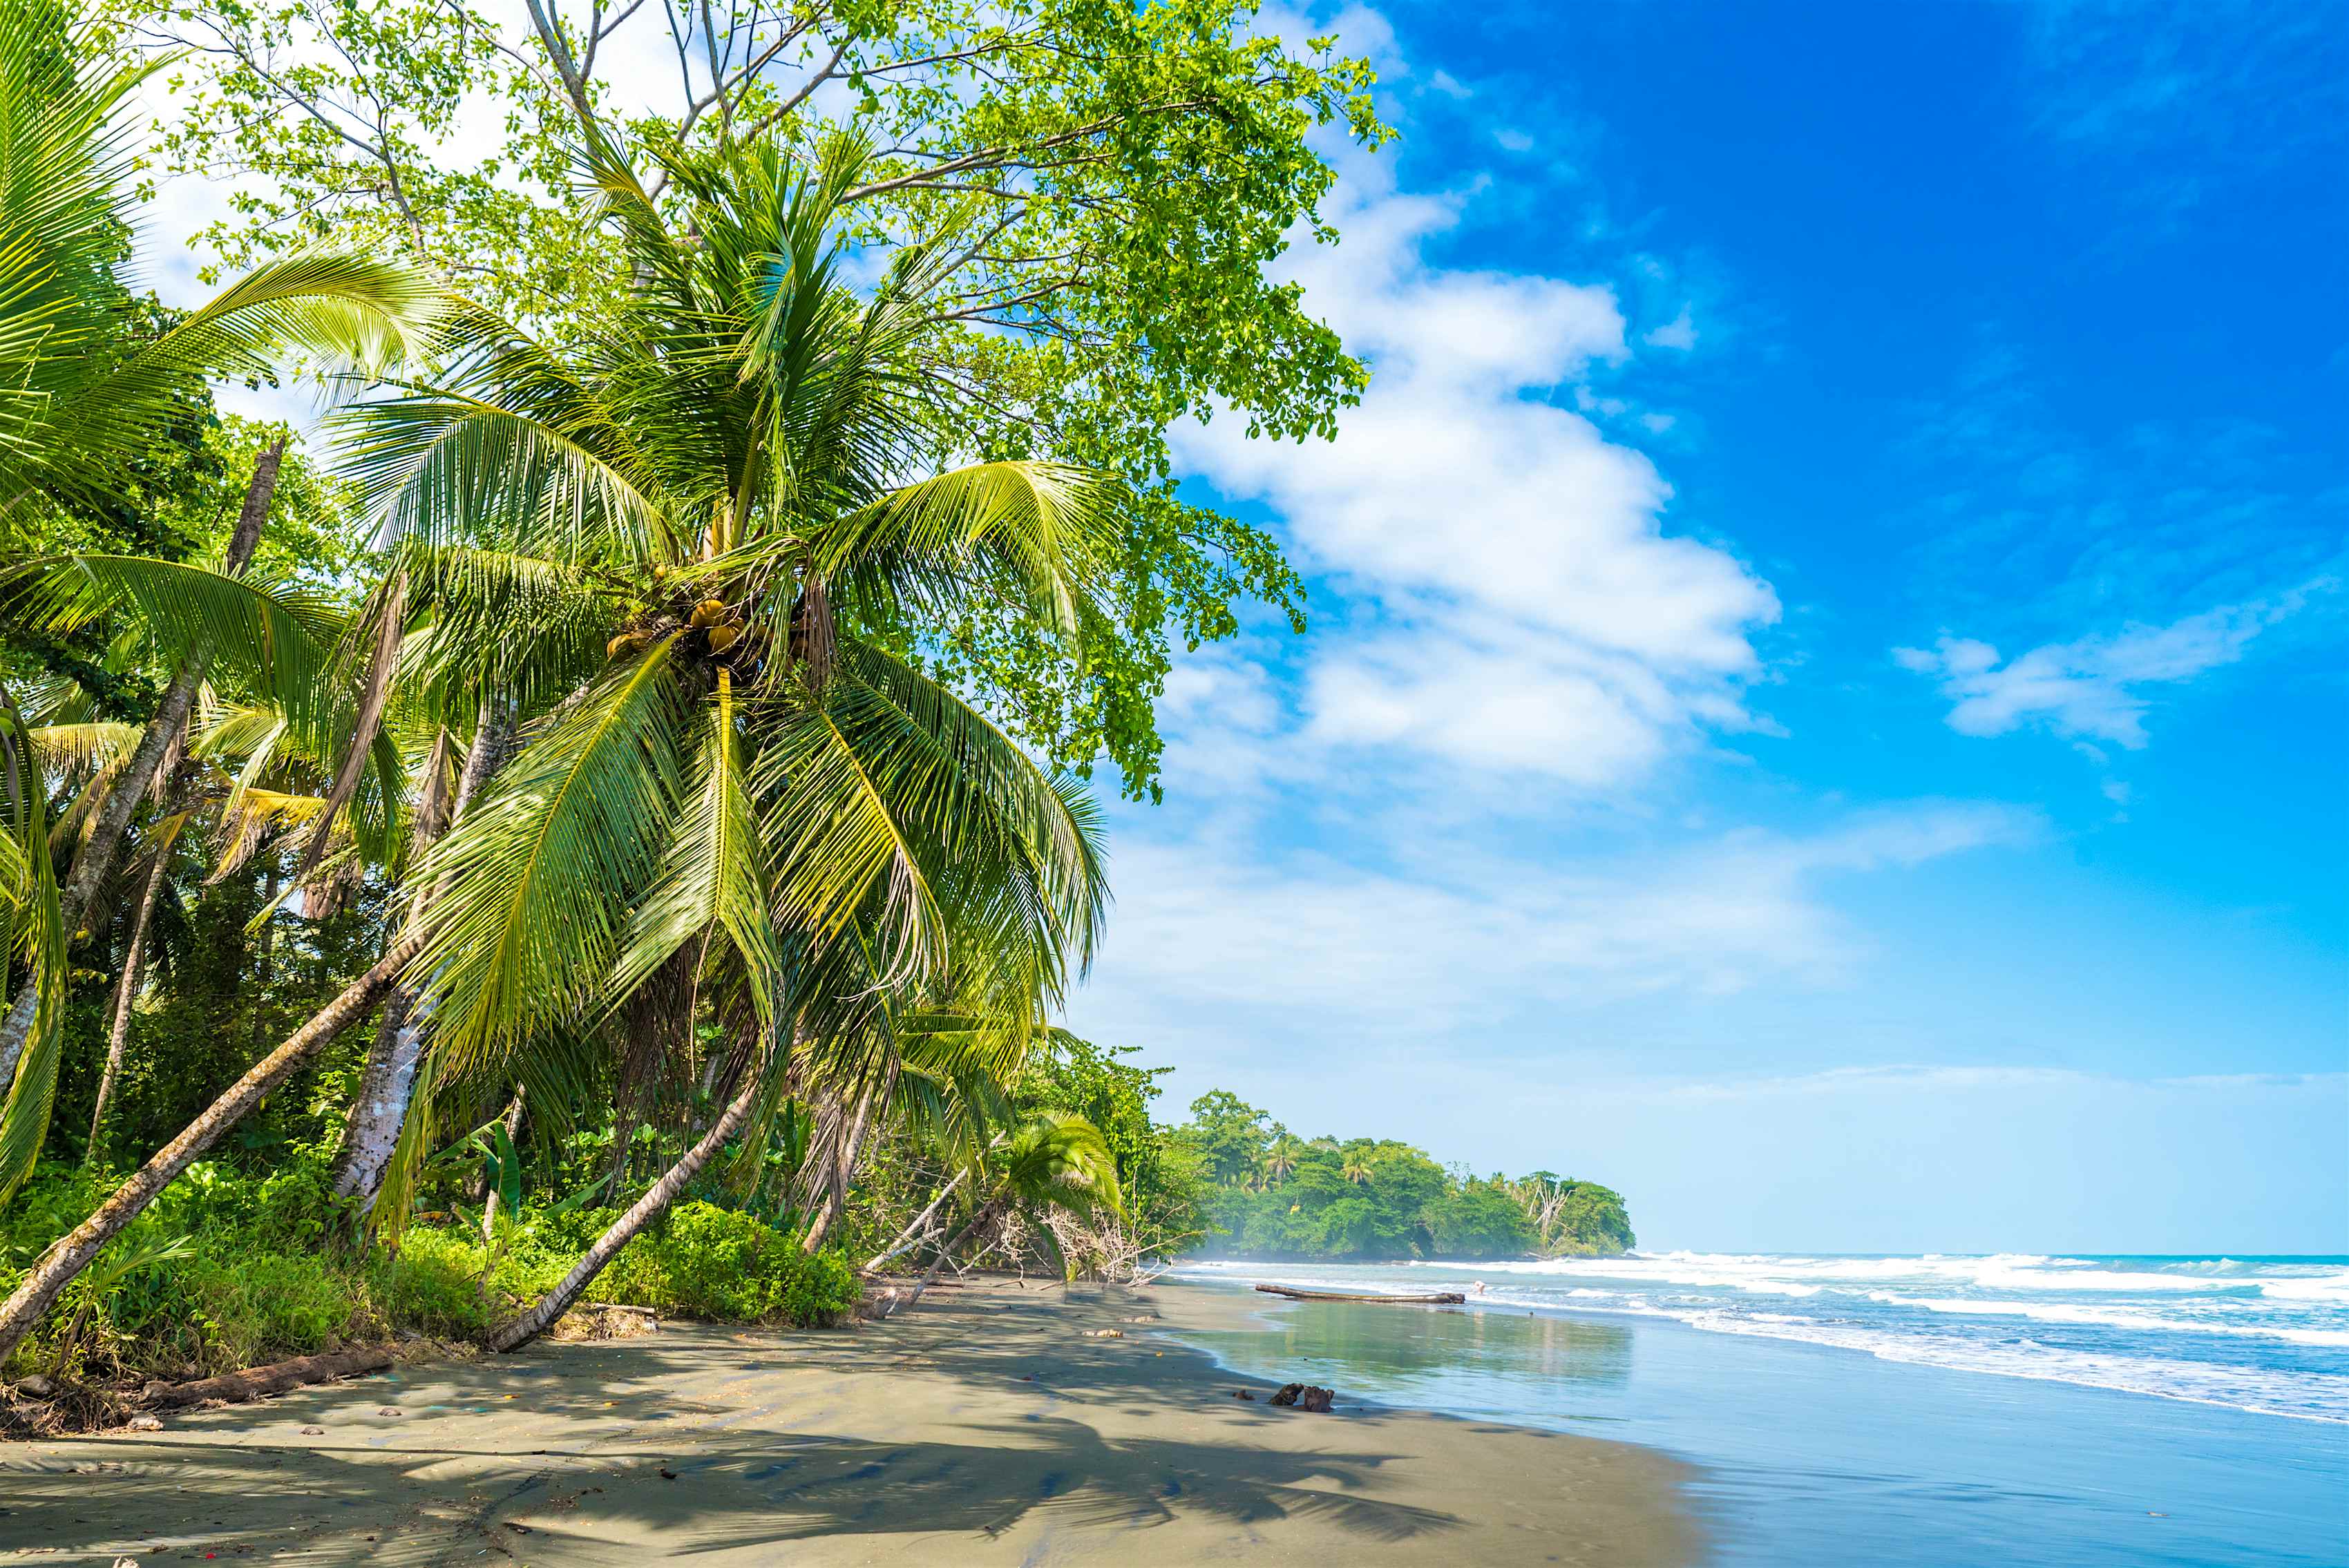 The 12 best beaches in Costa Rica - Lonely Planet